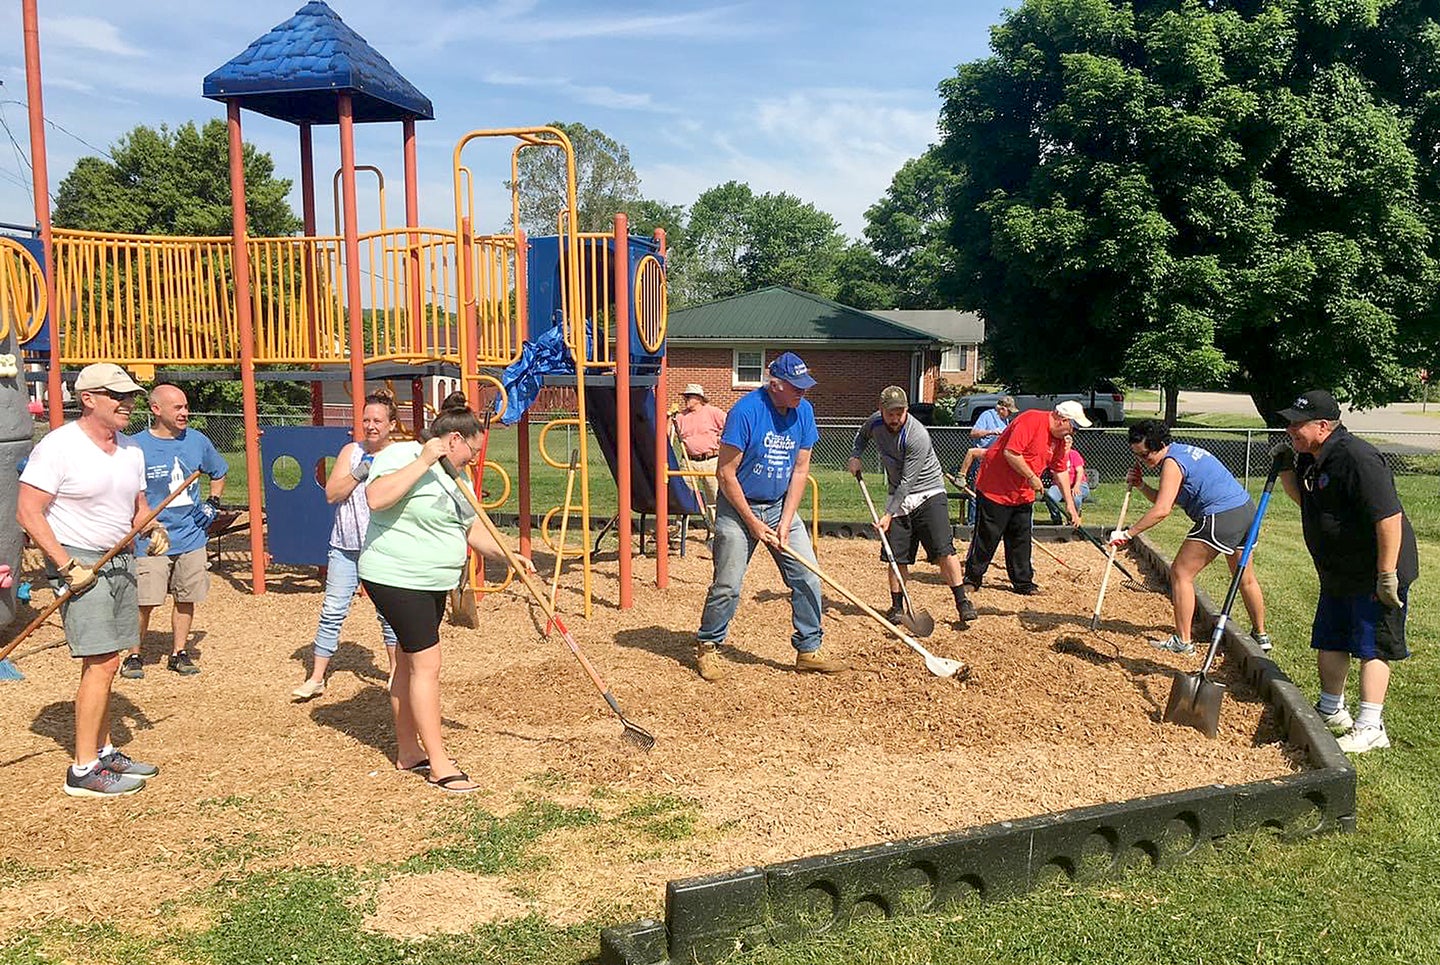 Sponsored content: Collaboration helps clean up community attraction; Independence Bank employees volunteer time to improve eyesore